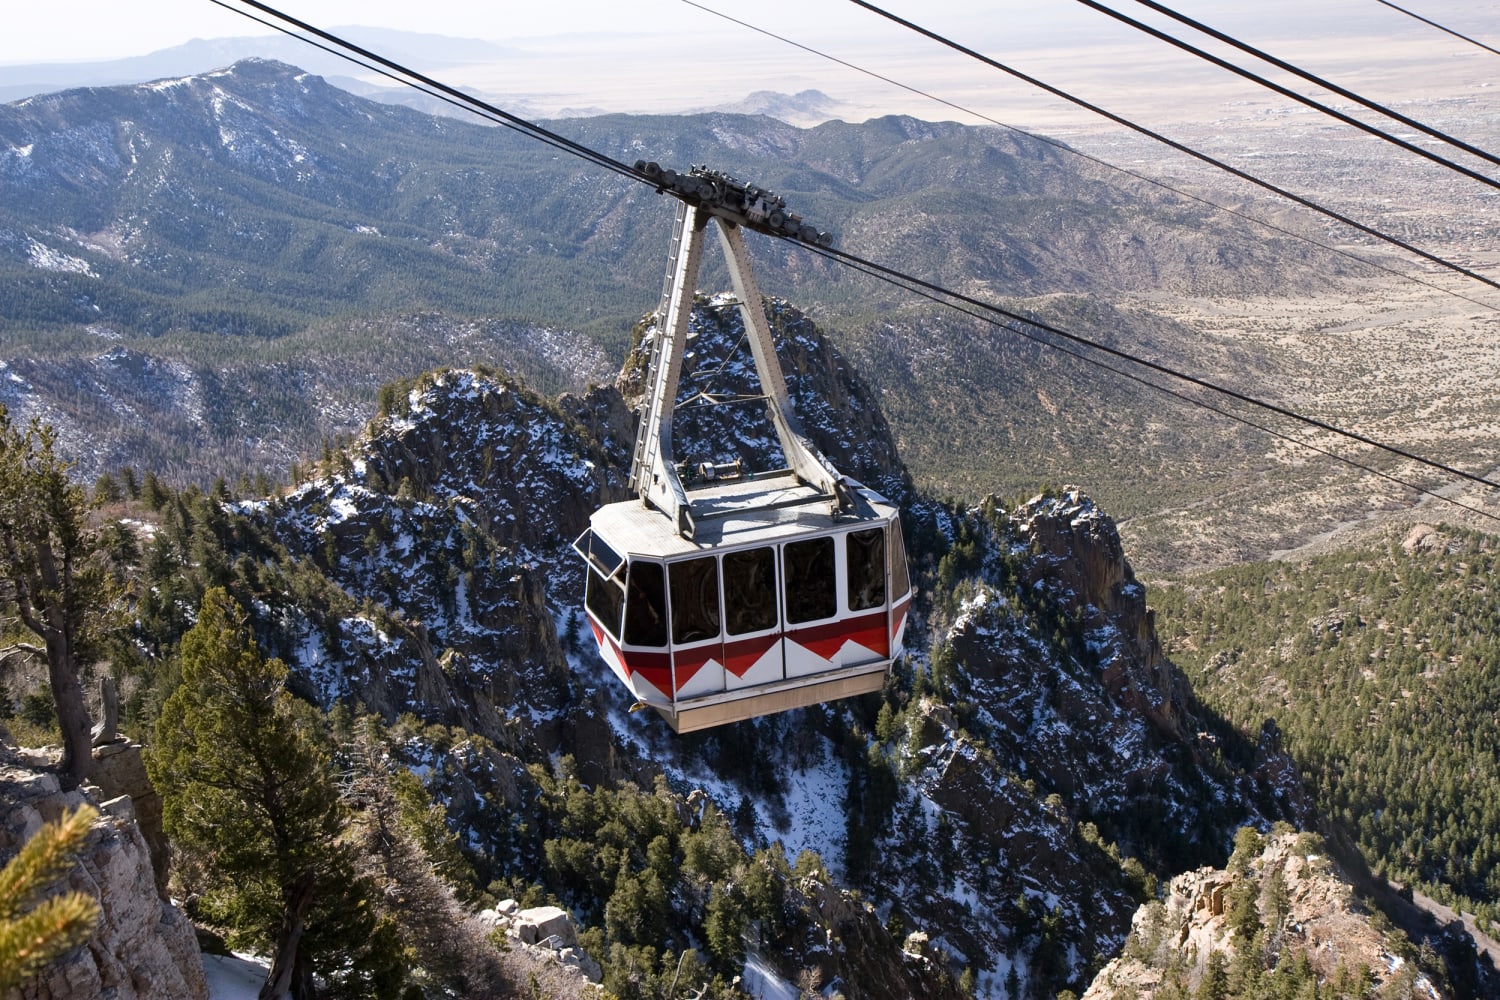 20 people stuck on Sandia Peak Tramway in New Mexico, rescue mission underway